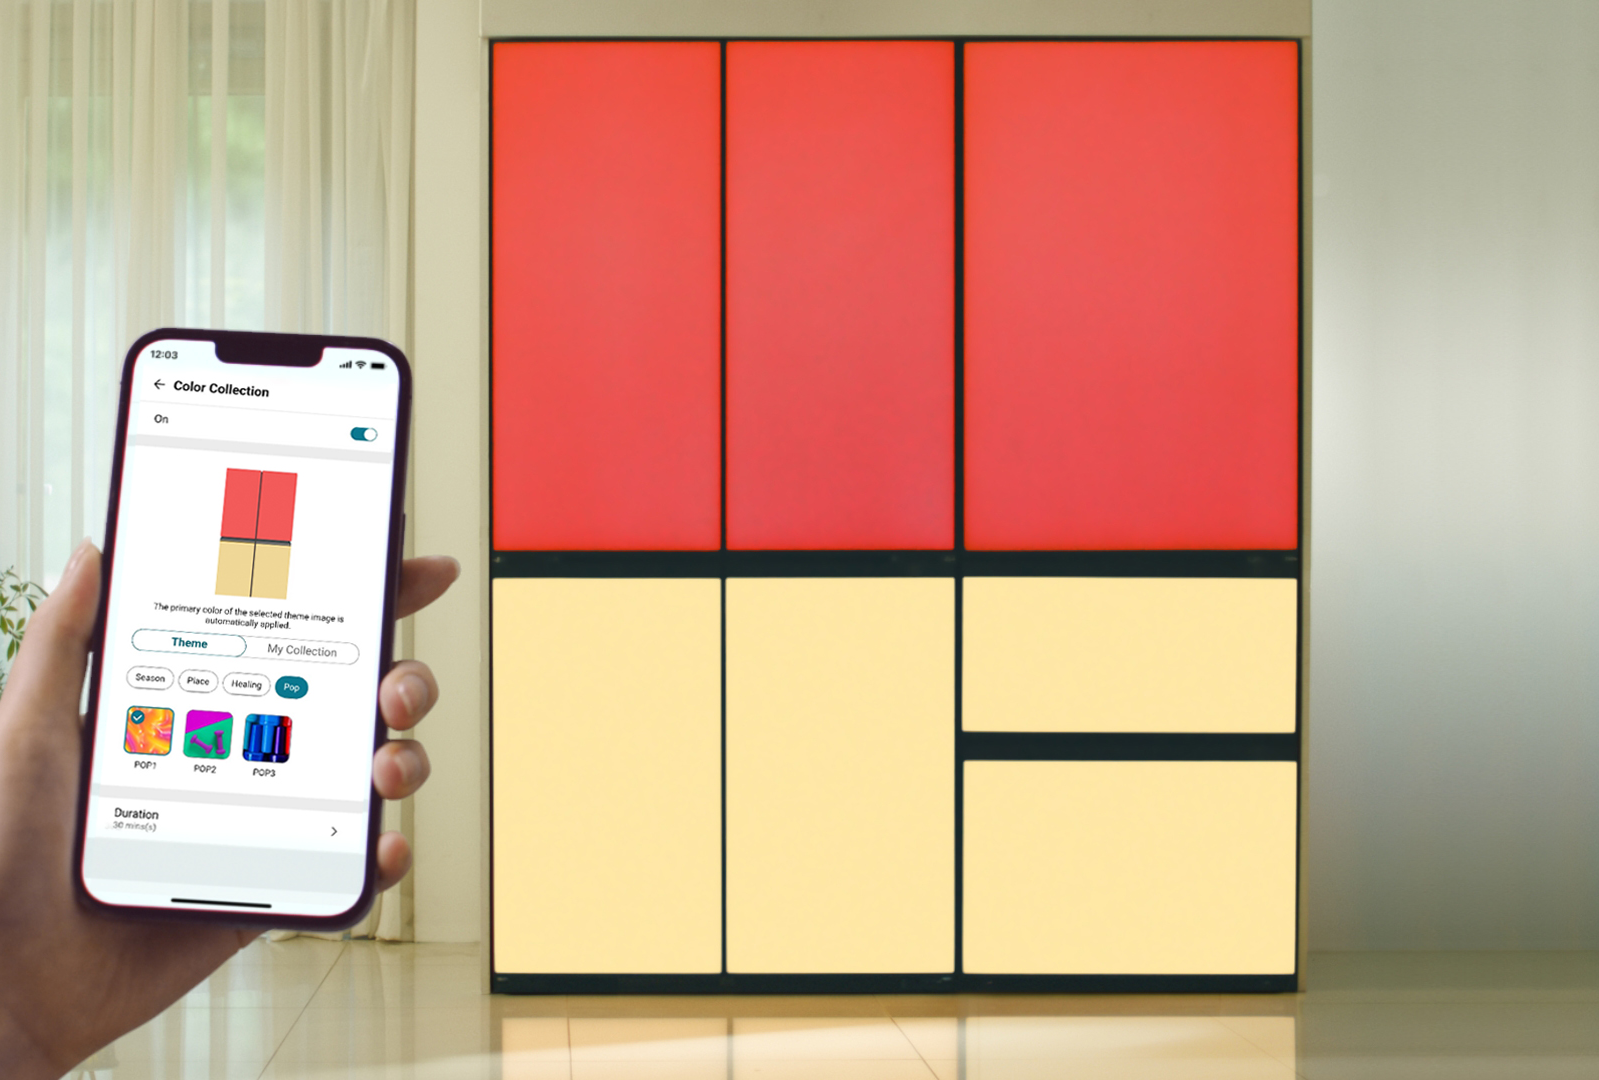 LG MoodUPTM refrigerator door panel colors can be changed via the ThinQ app